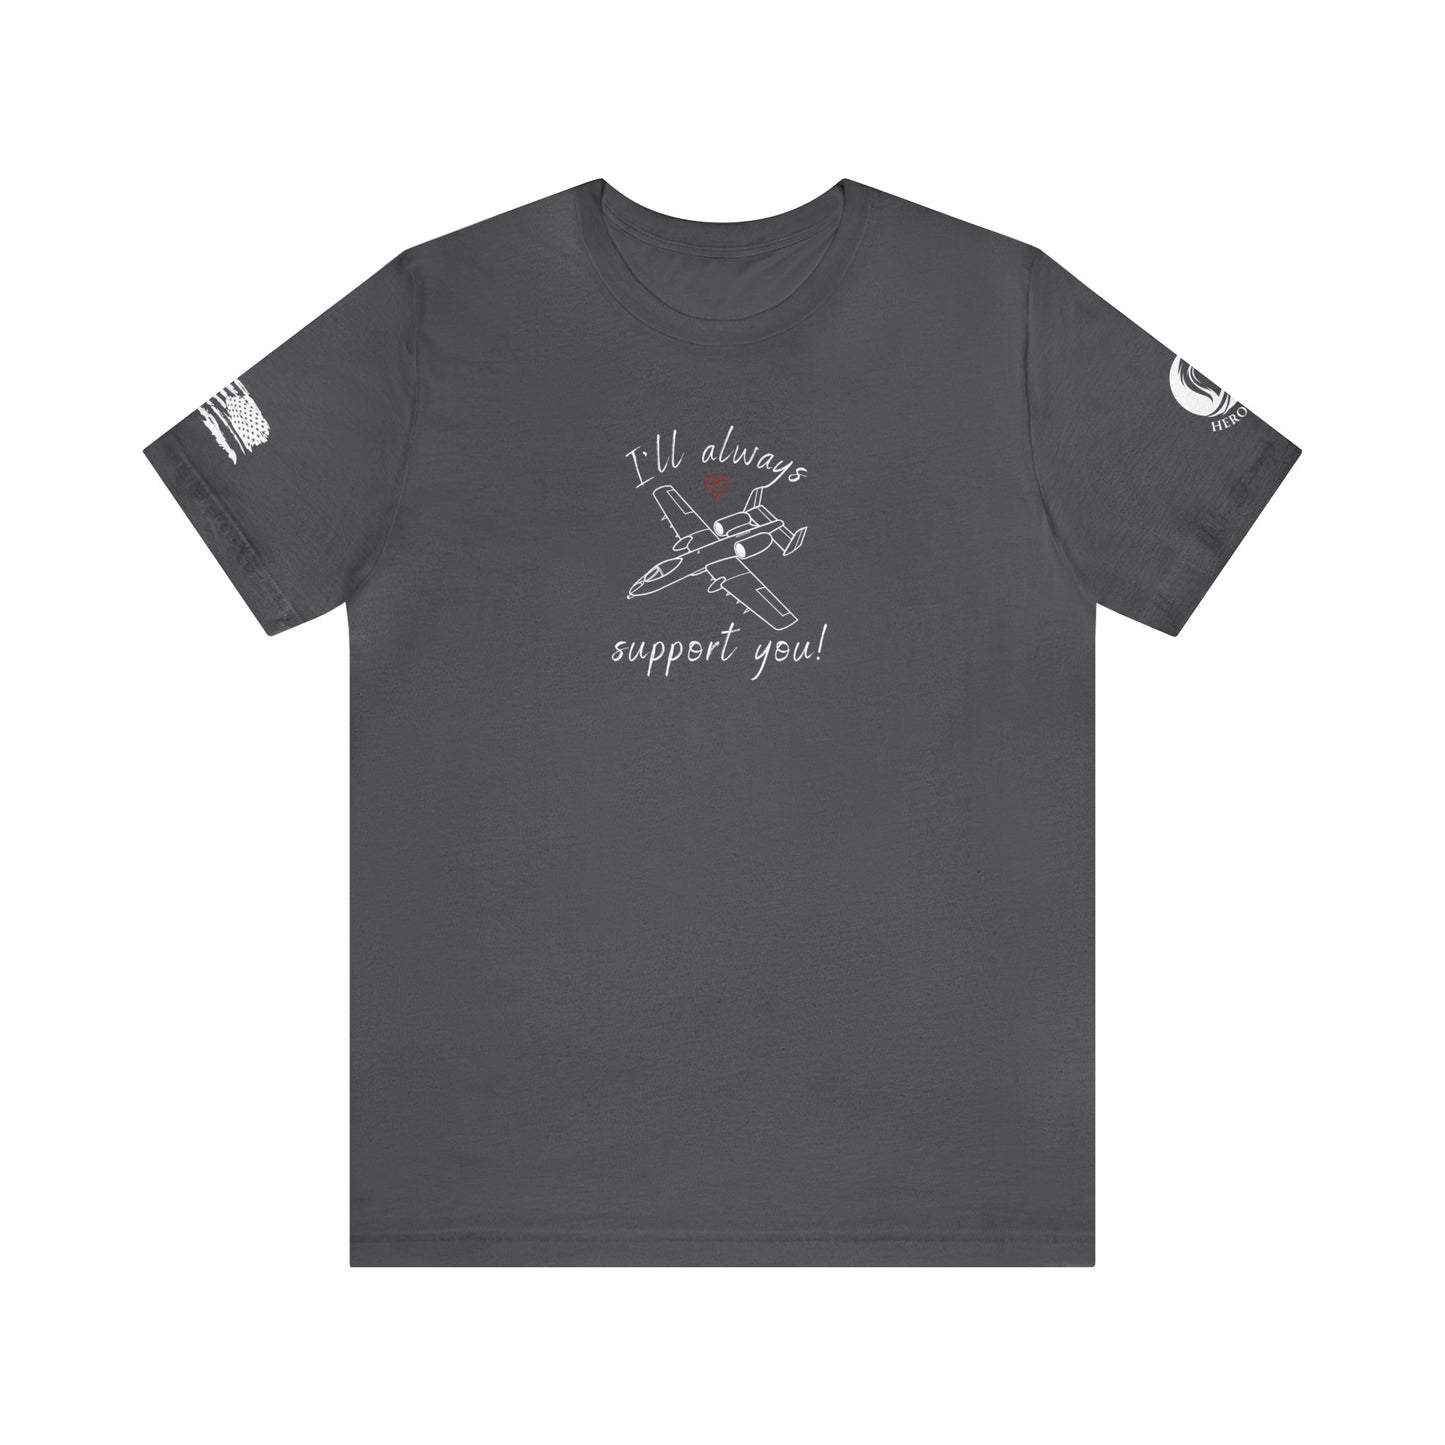 Funny A10 Warthog Support T-shirt